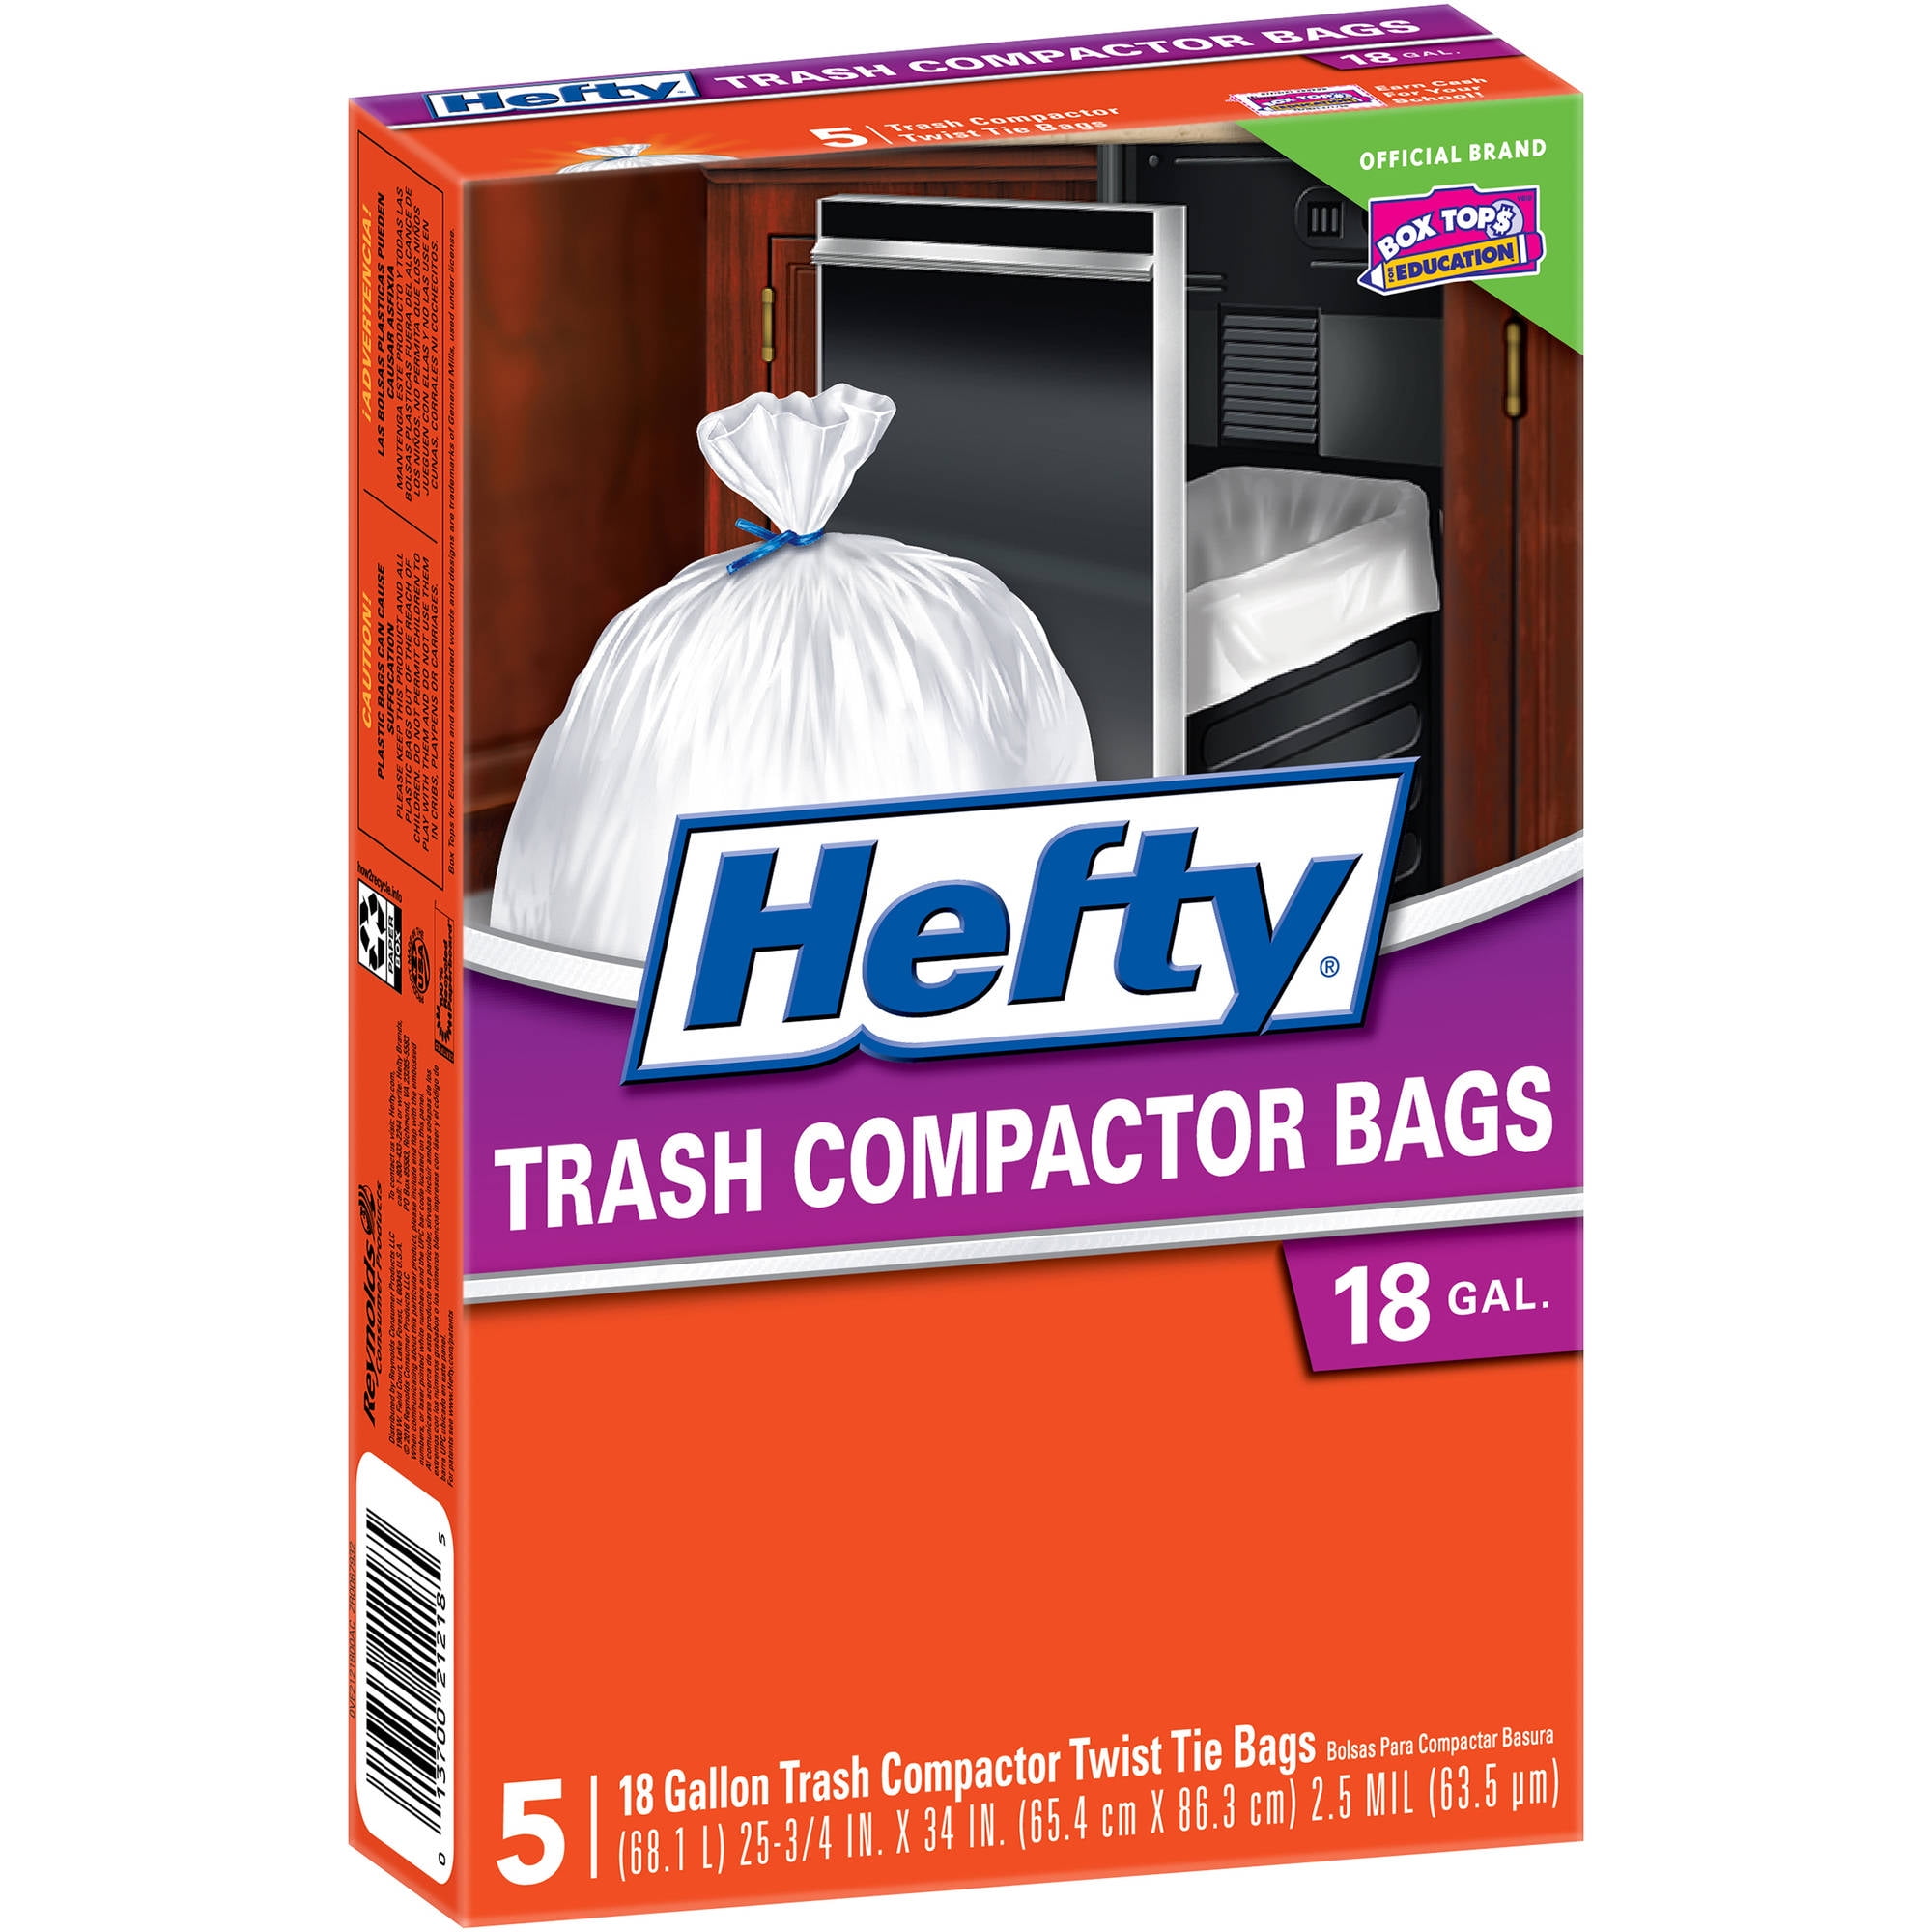 Lot of 3 5-Count Hefty Trash Compactor Bags 18 Gallon E2-1218 15 Bags Total 